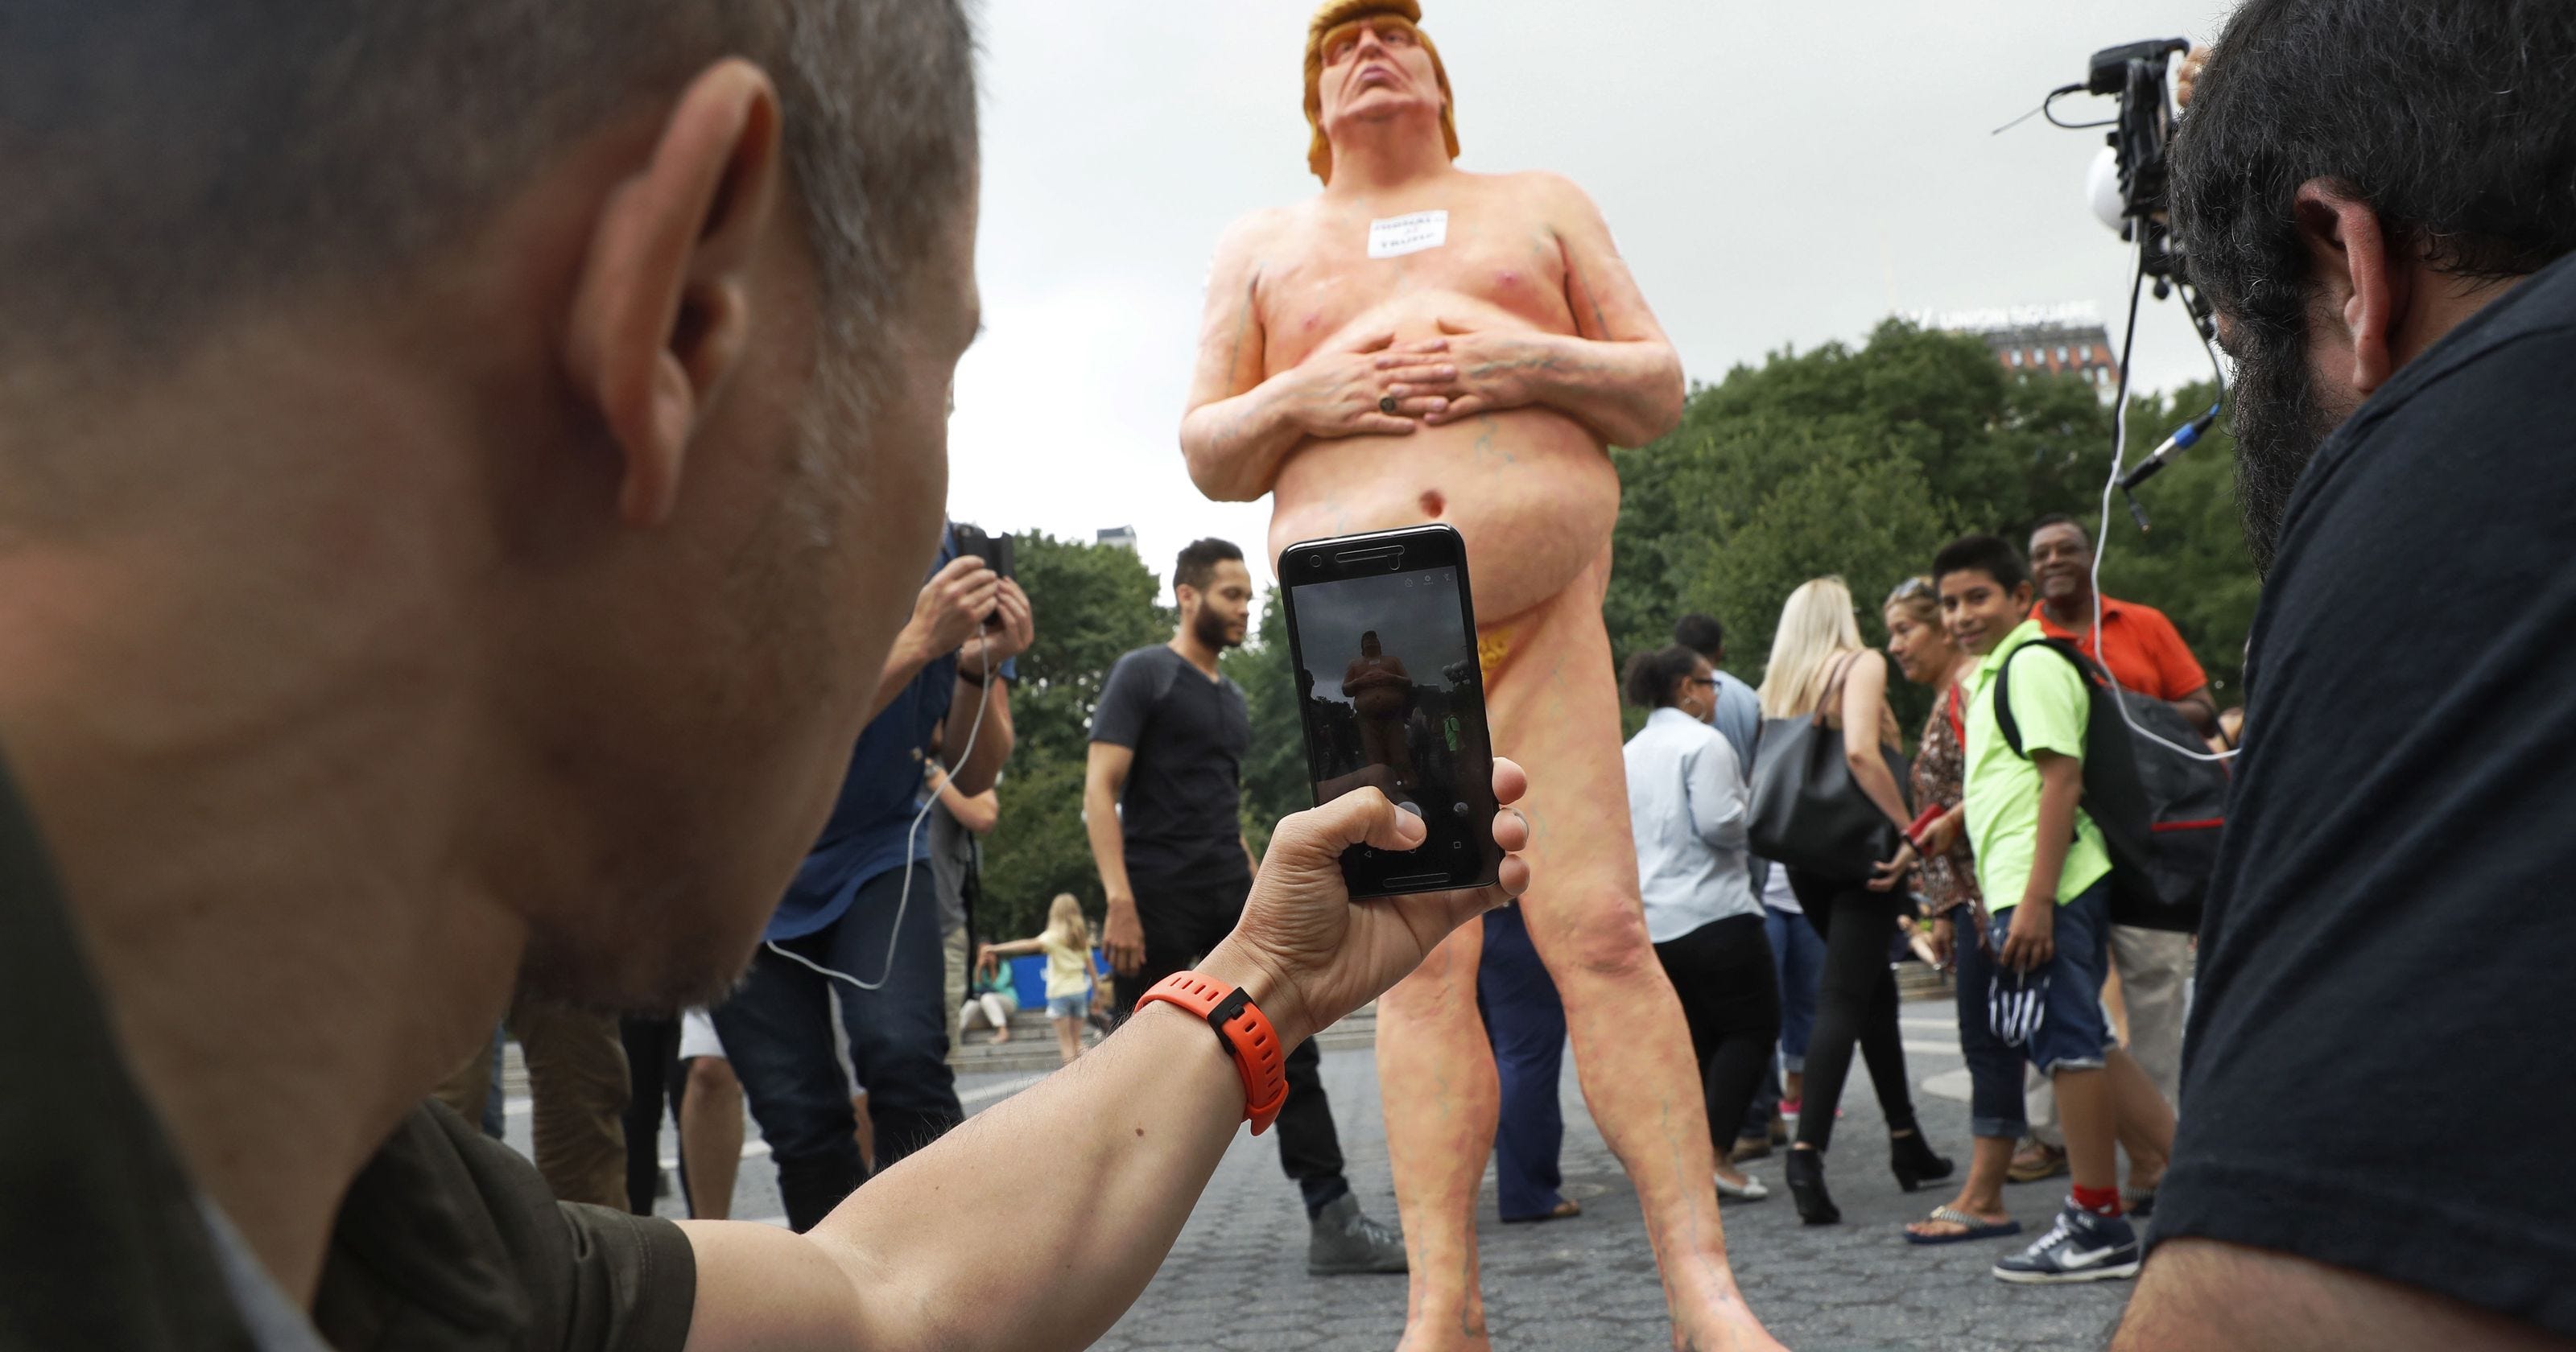 Naked Donald Trump Statue